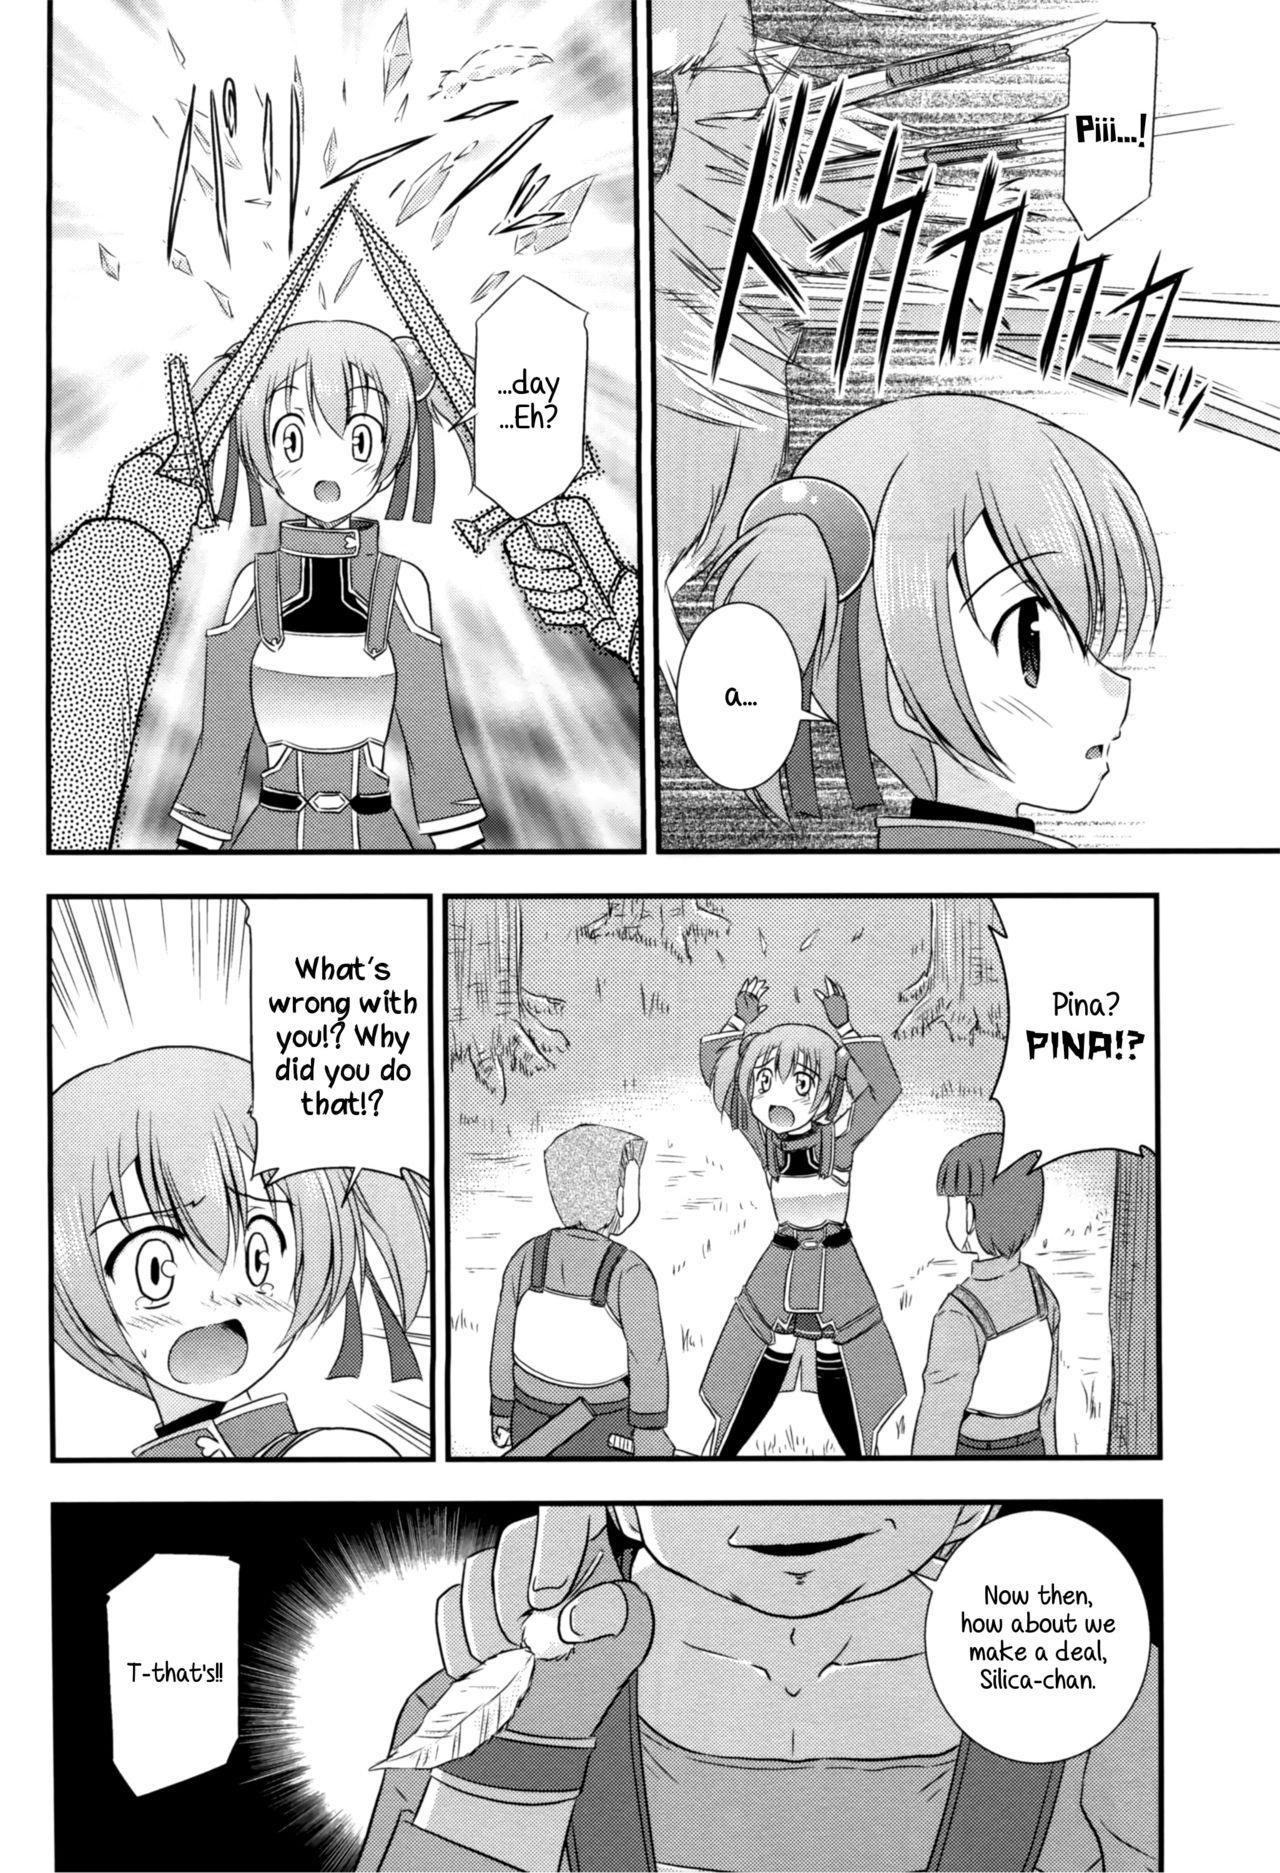 Pussy Play Silica Route Online - Sword art online Hard Core Porn - Page 5